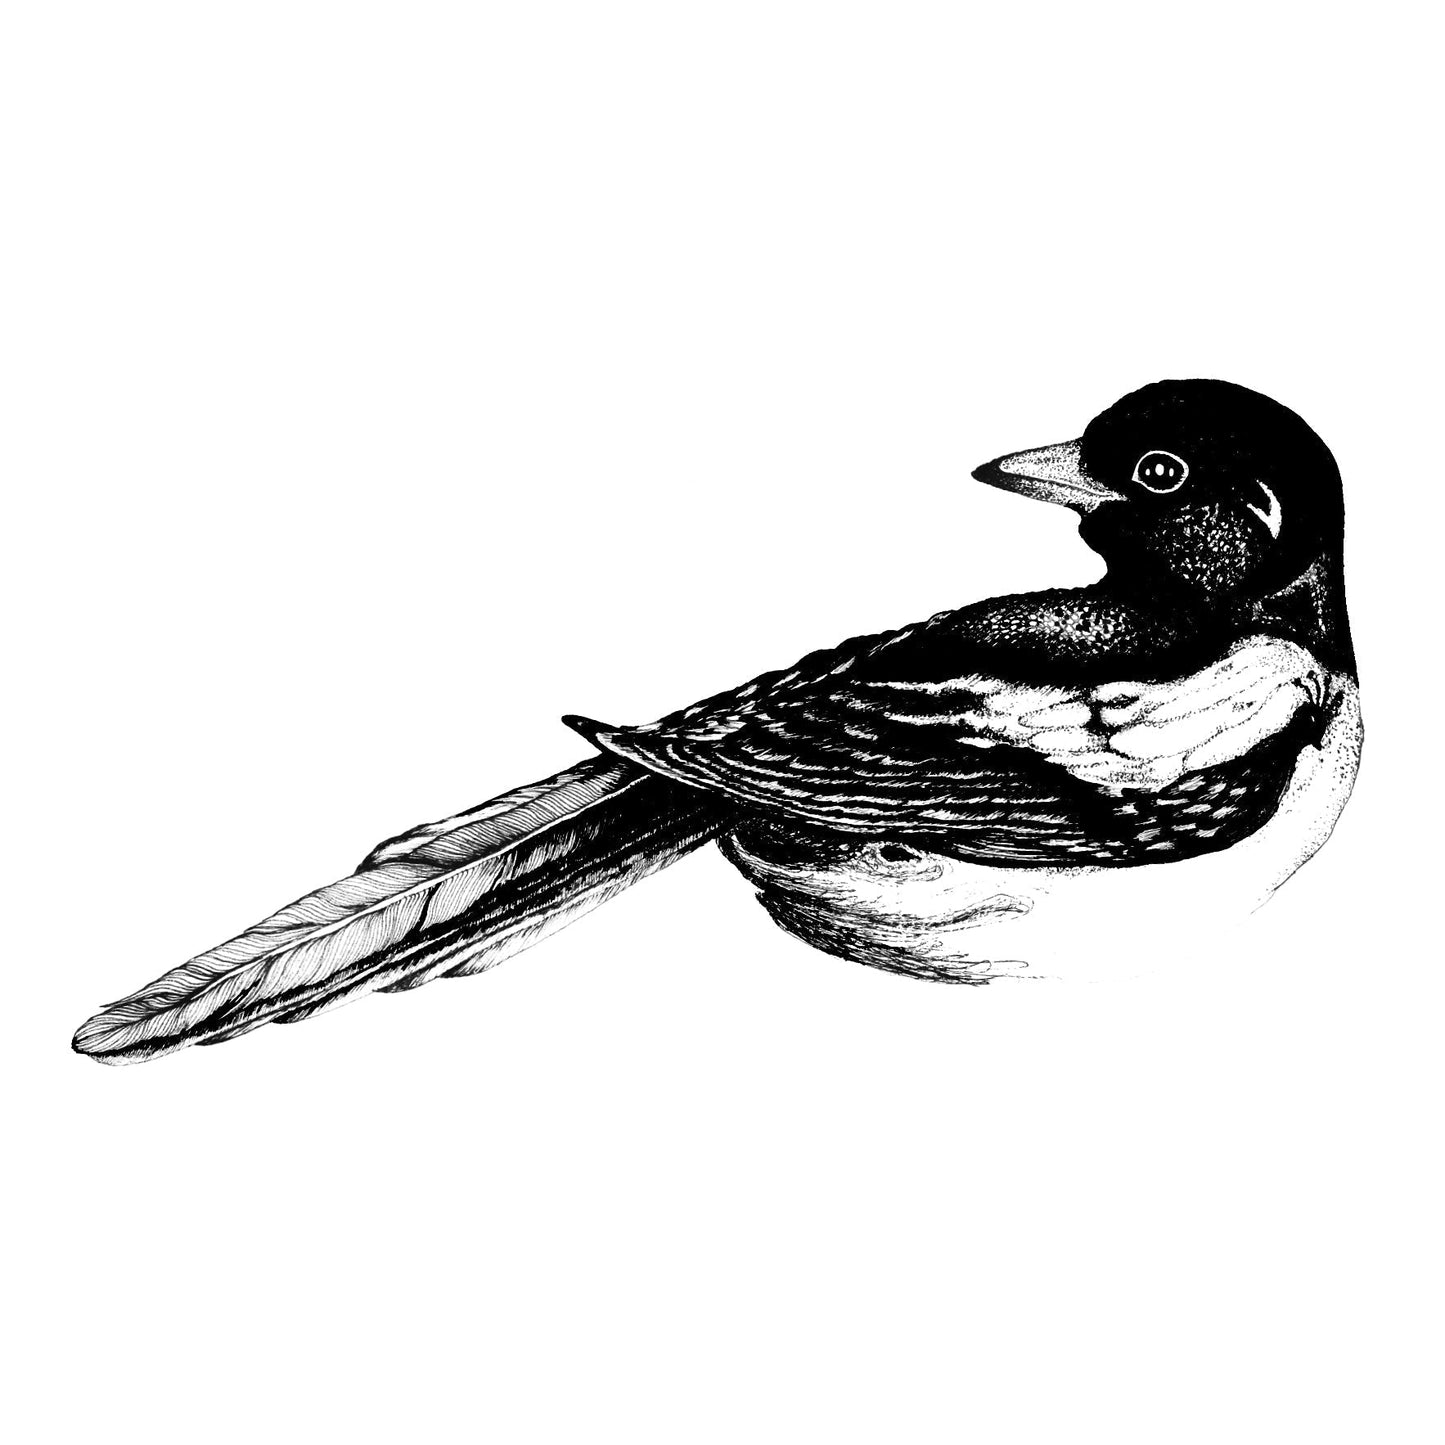 The Curious Magpie Series - Four For Boy - Limited Edition Print